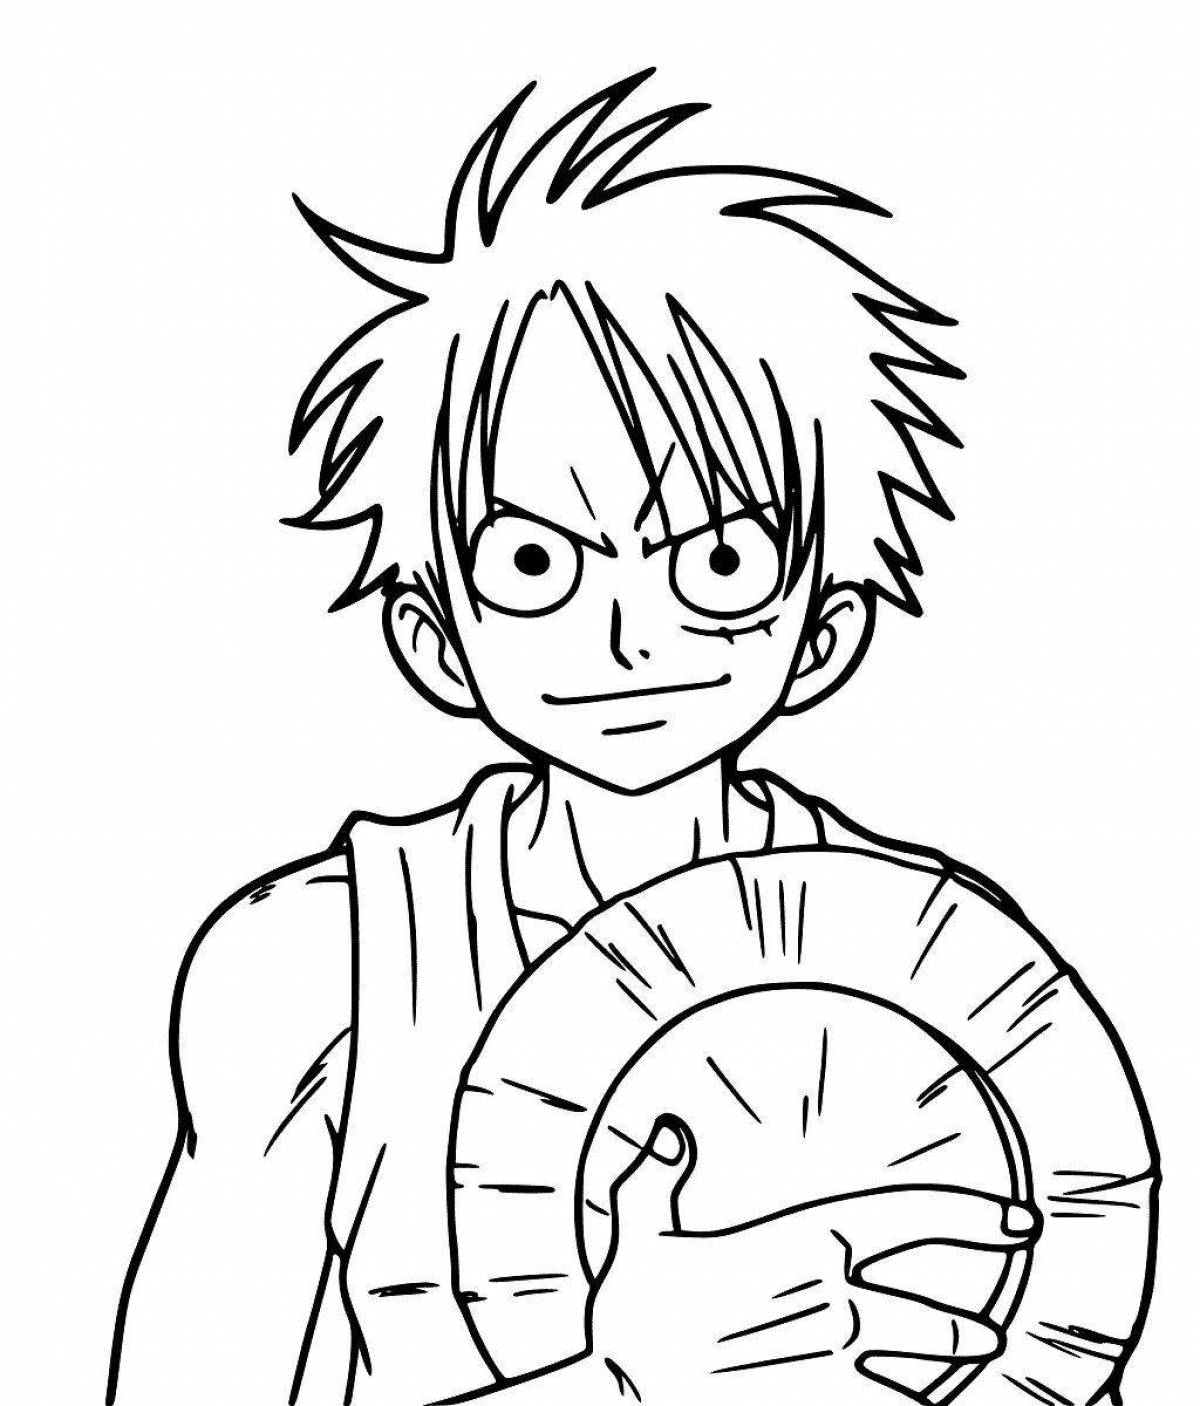 Coloring cute luffy one piece